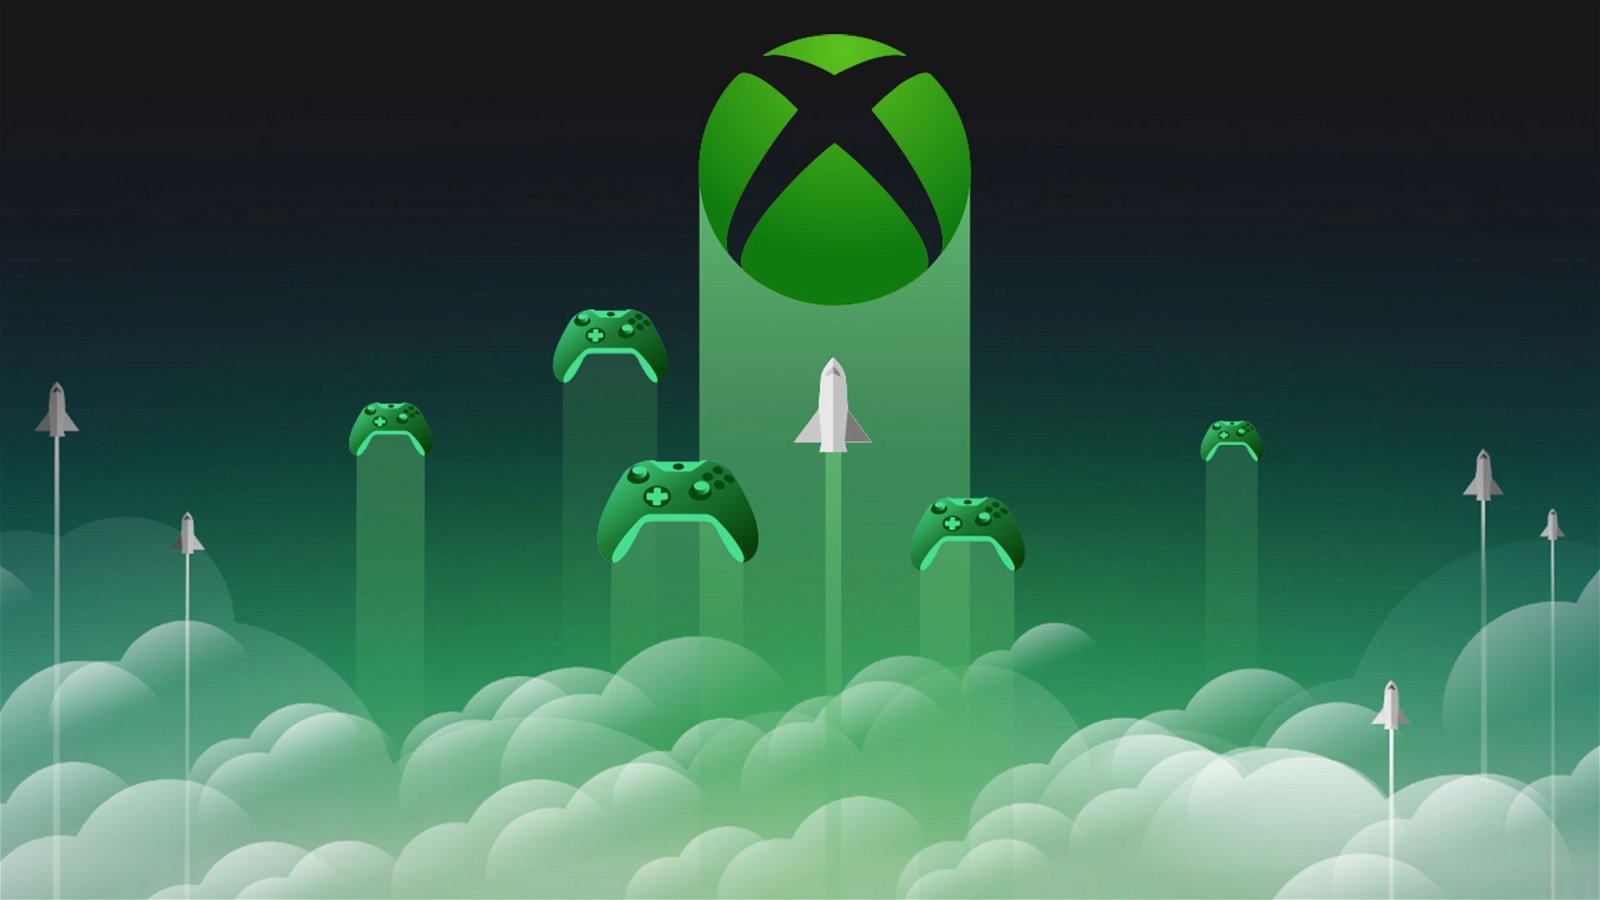 GTA V, Elden Ring and other games filter their arrival on Xbox Cloud Gaming